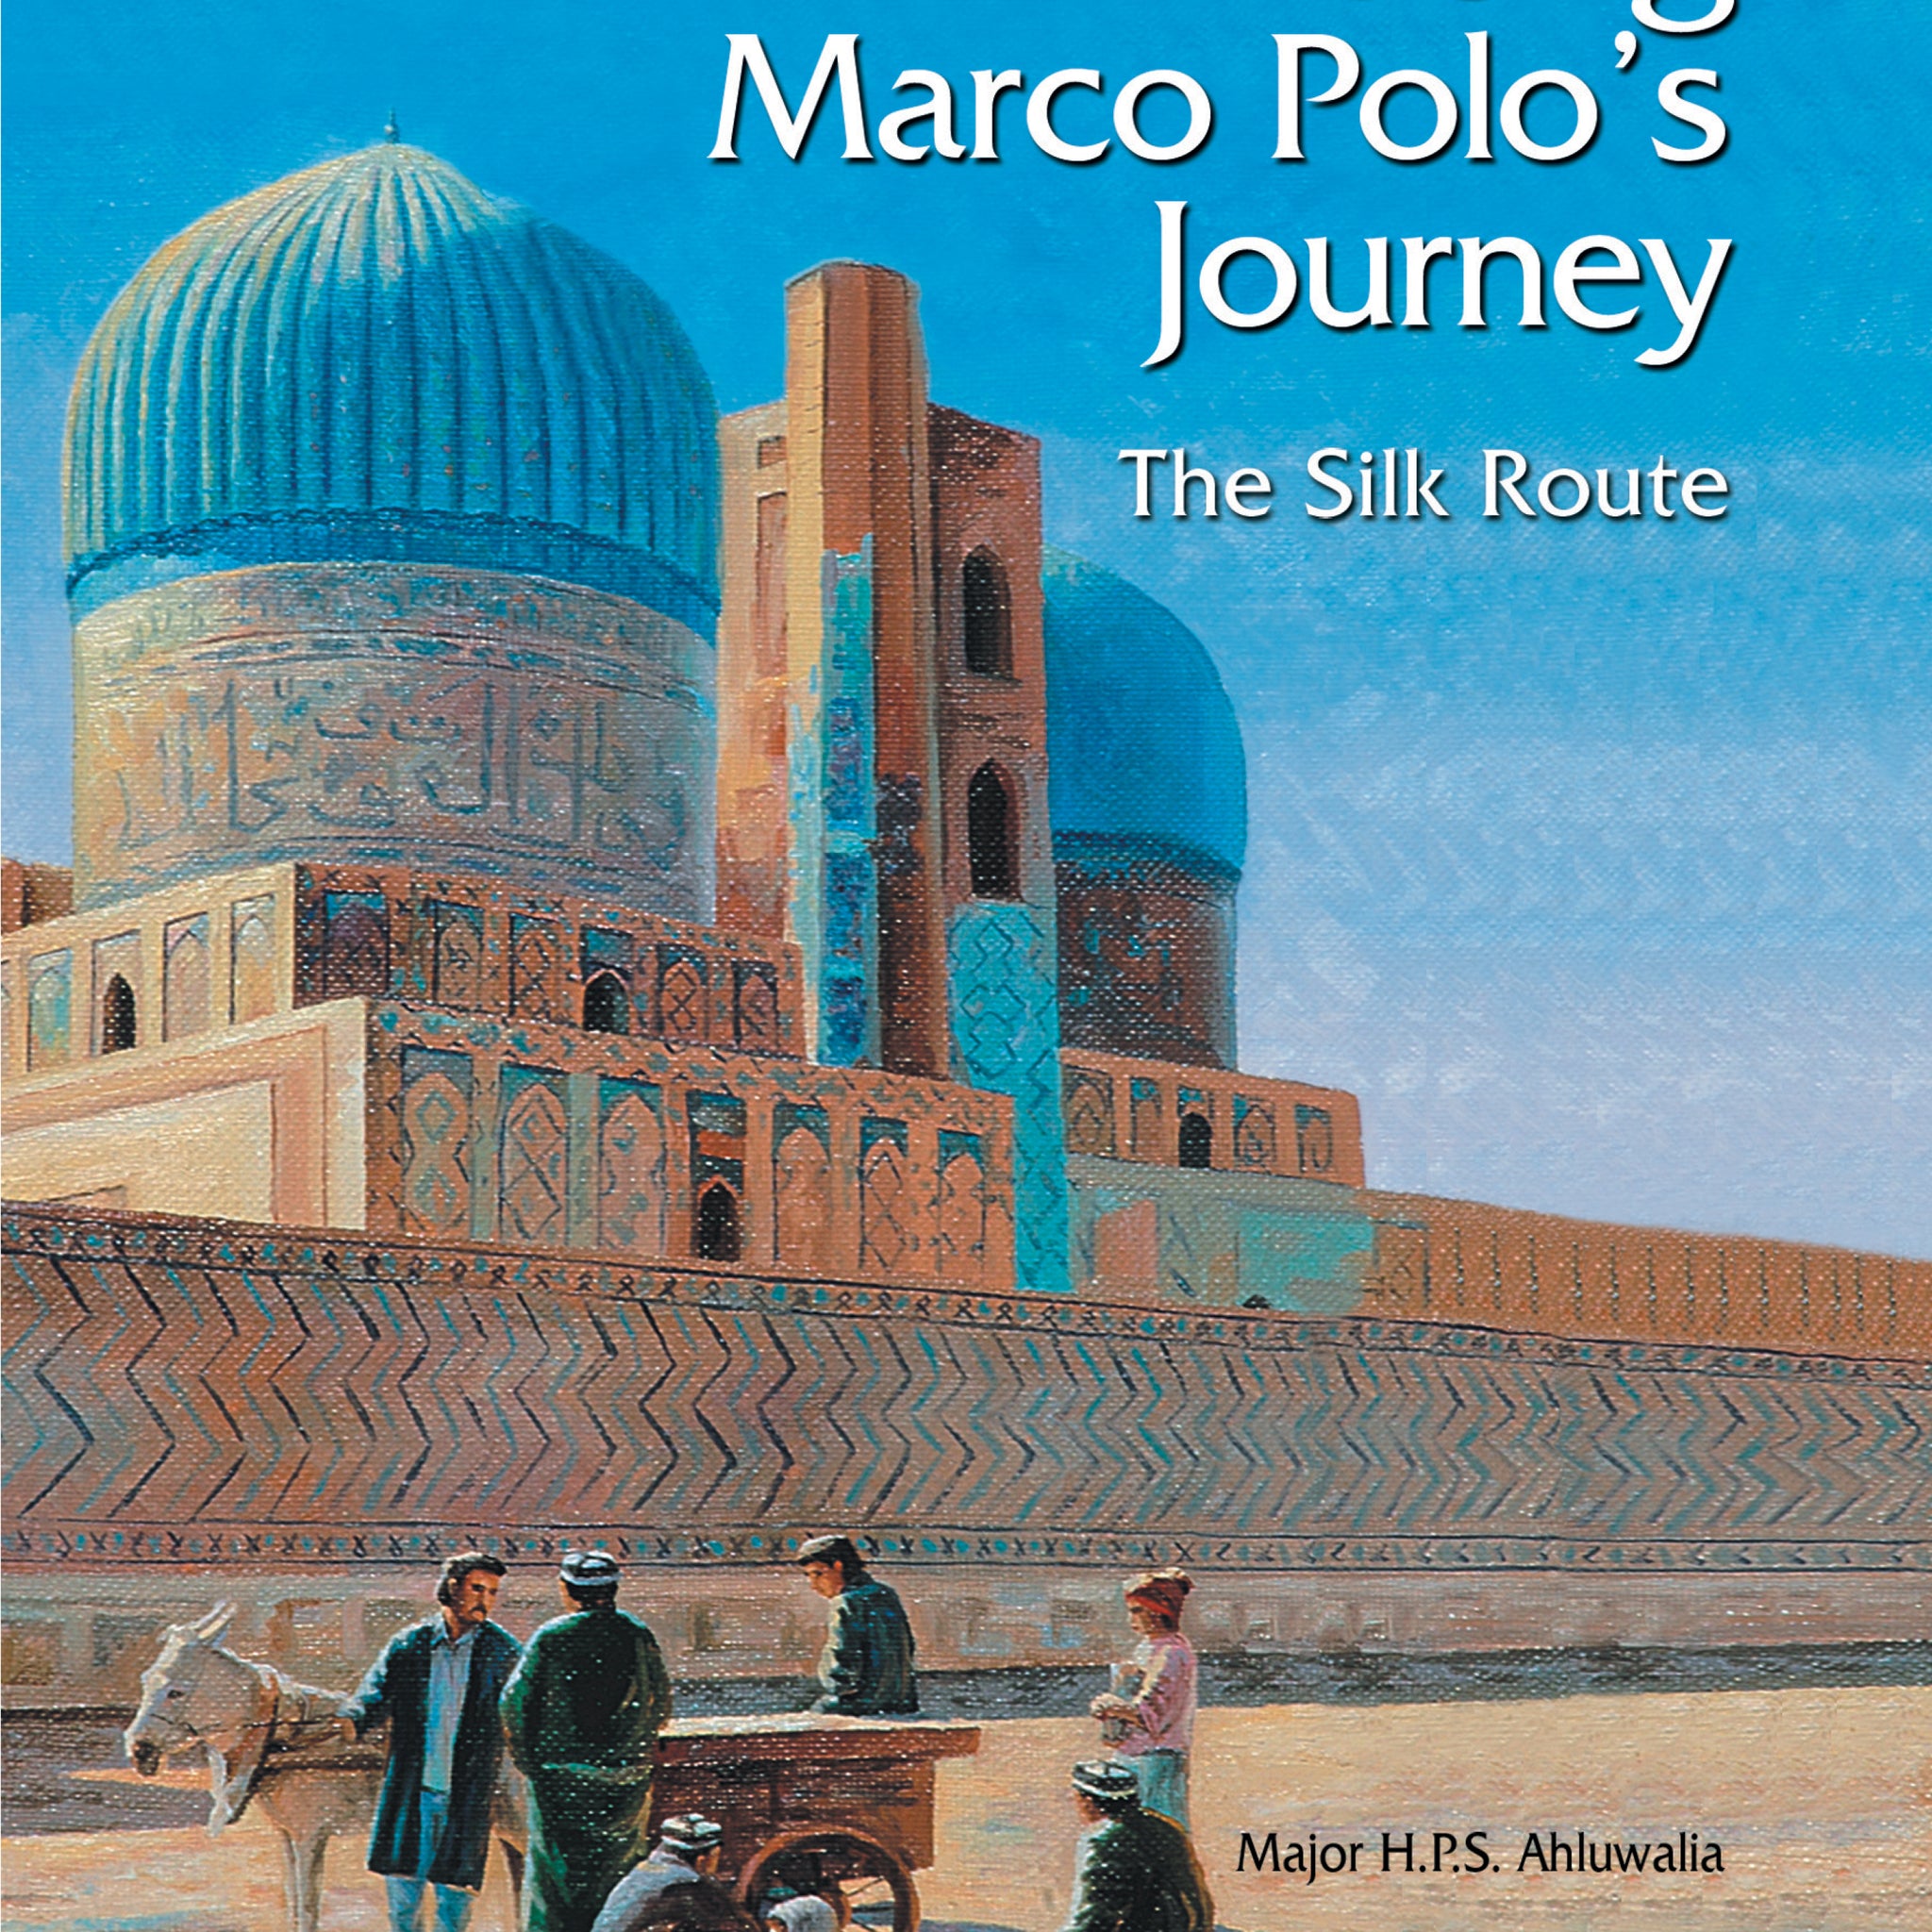 Tracing Marco Polo's Journey: The Silk Route